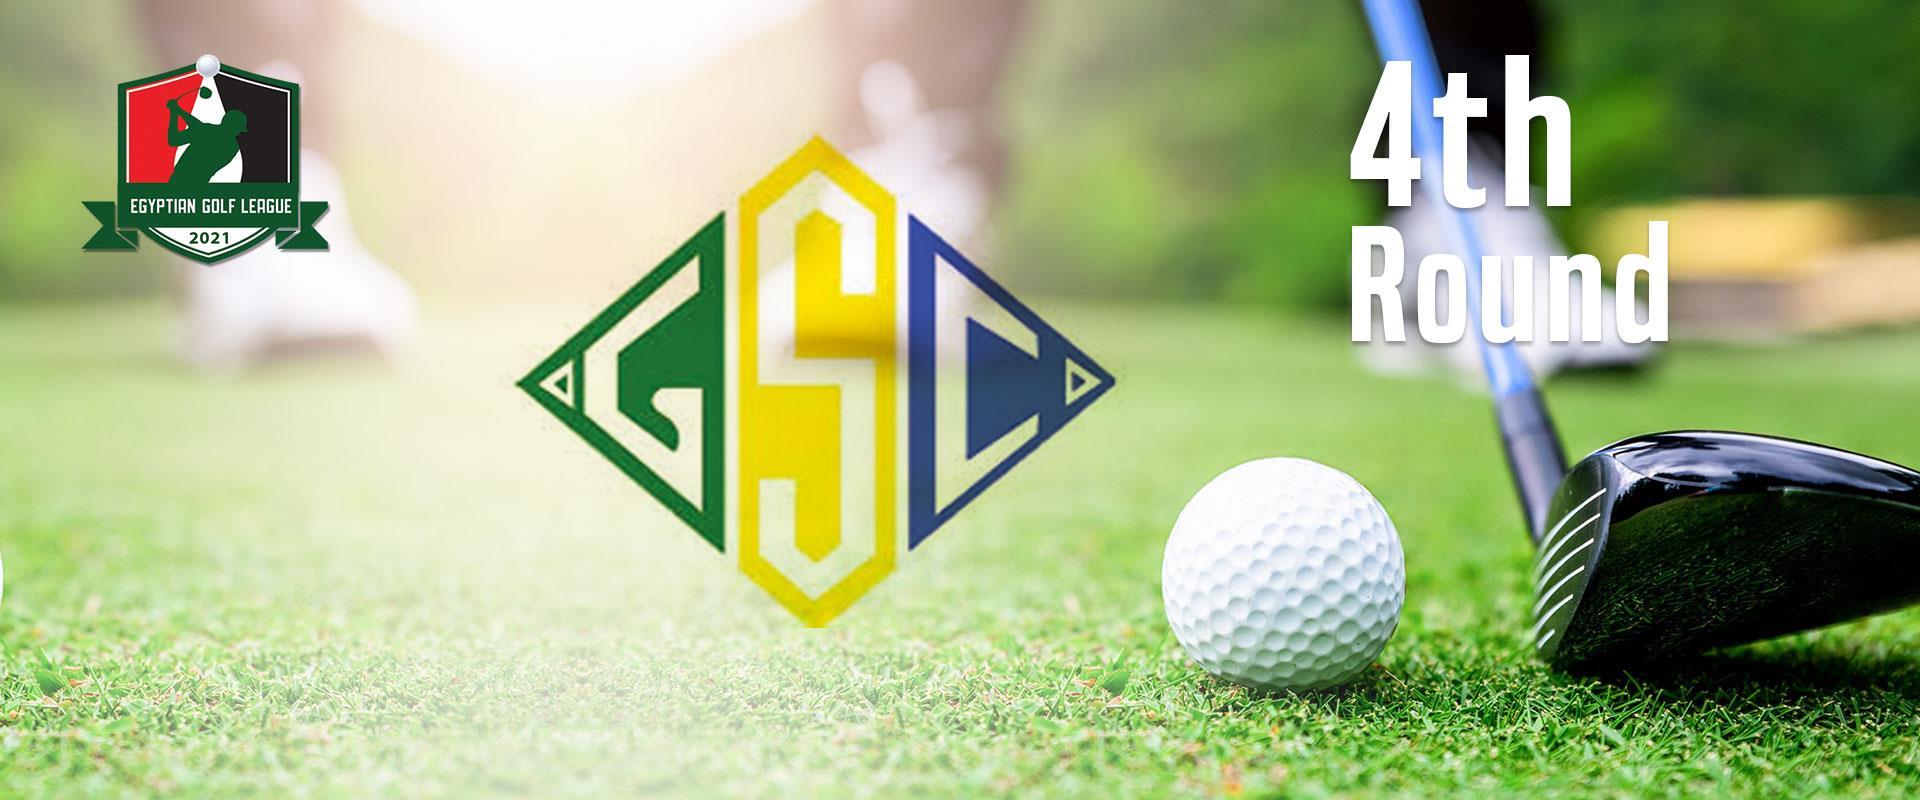 Musical Chairs in the Egyptian Golf League Table as the 2021 season heats up